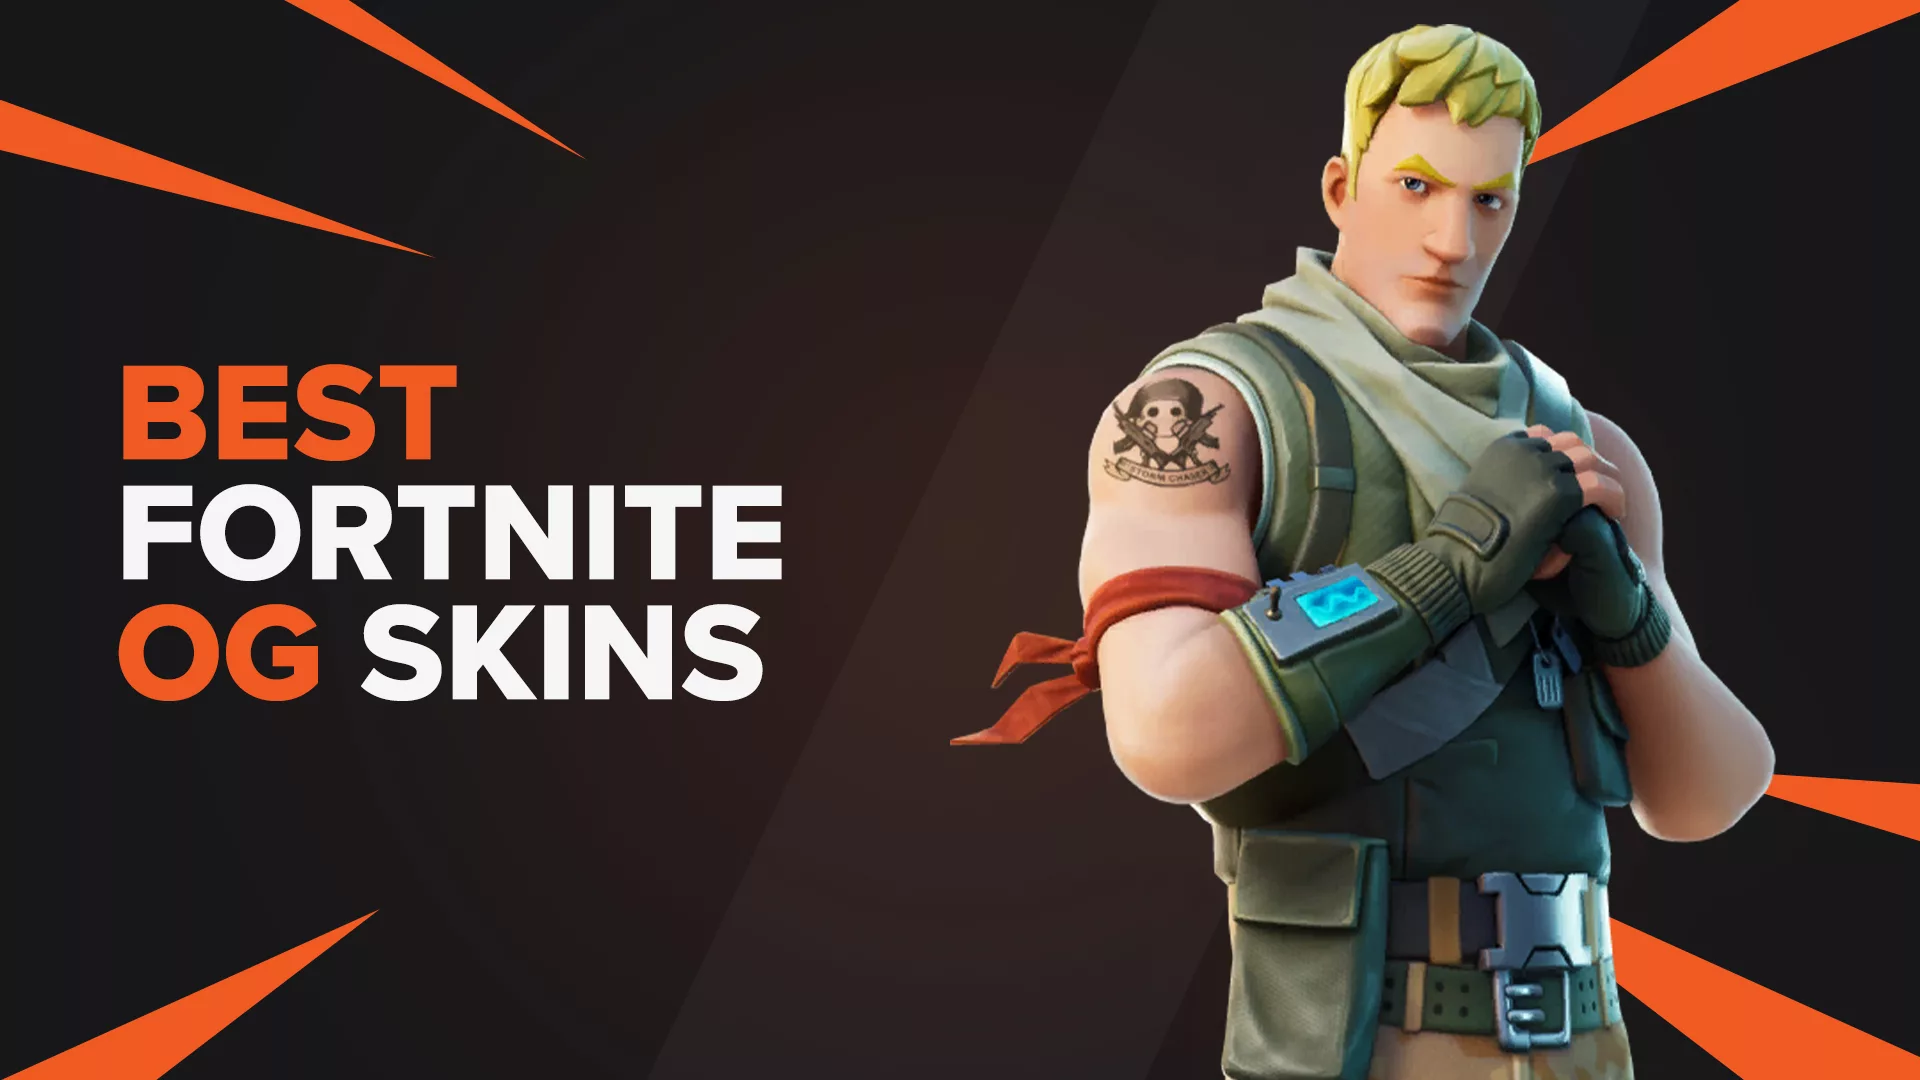 If You Own These Fortnite Skins, You Are OG!